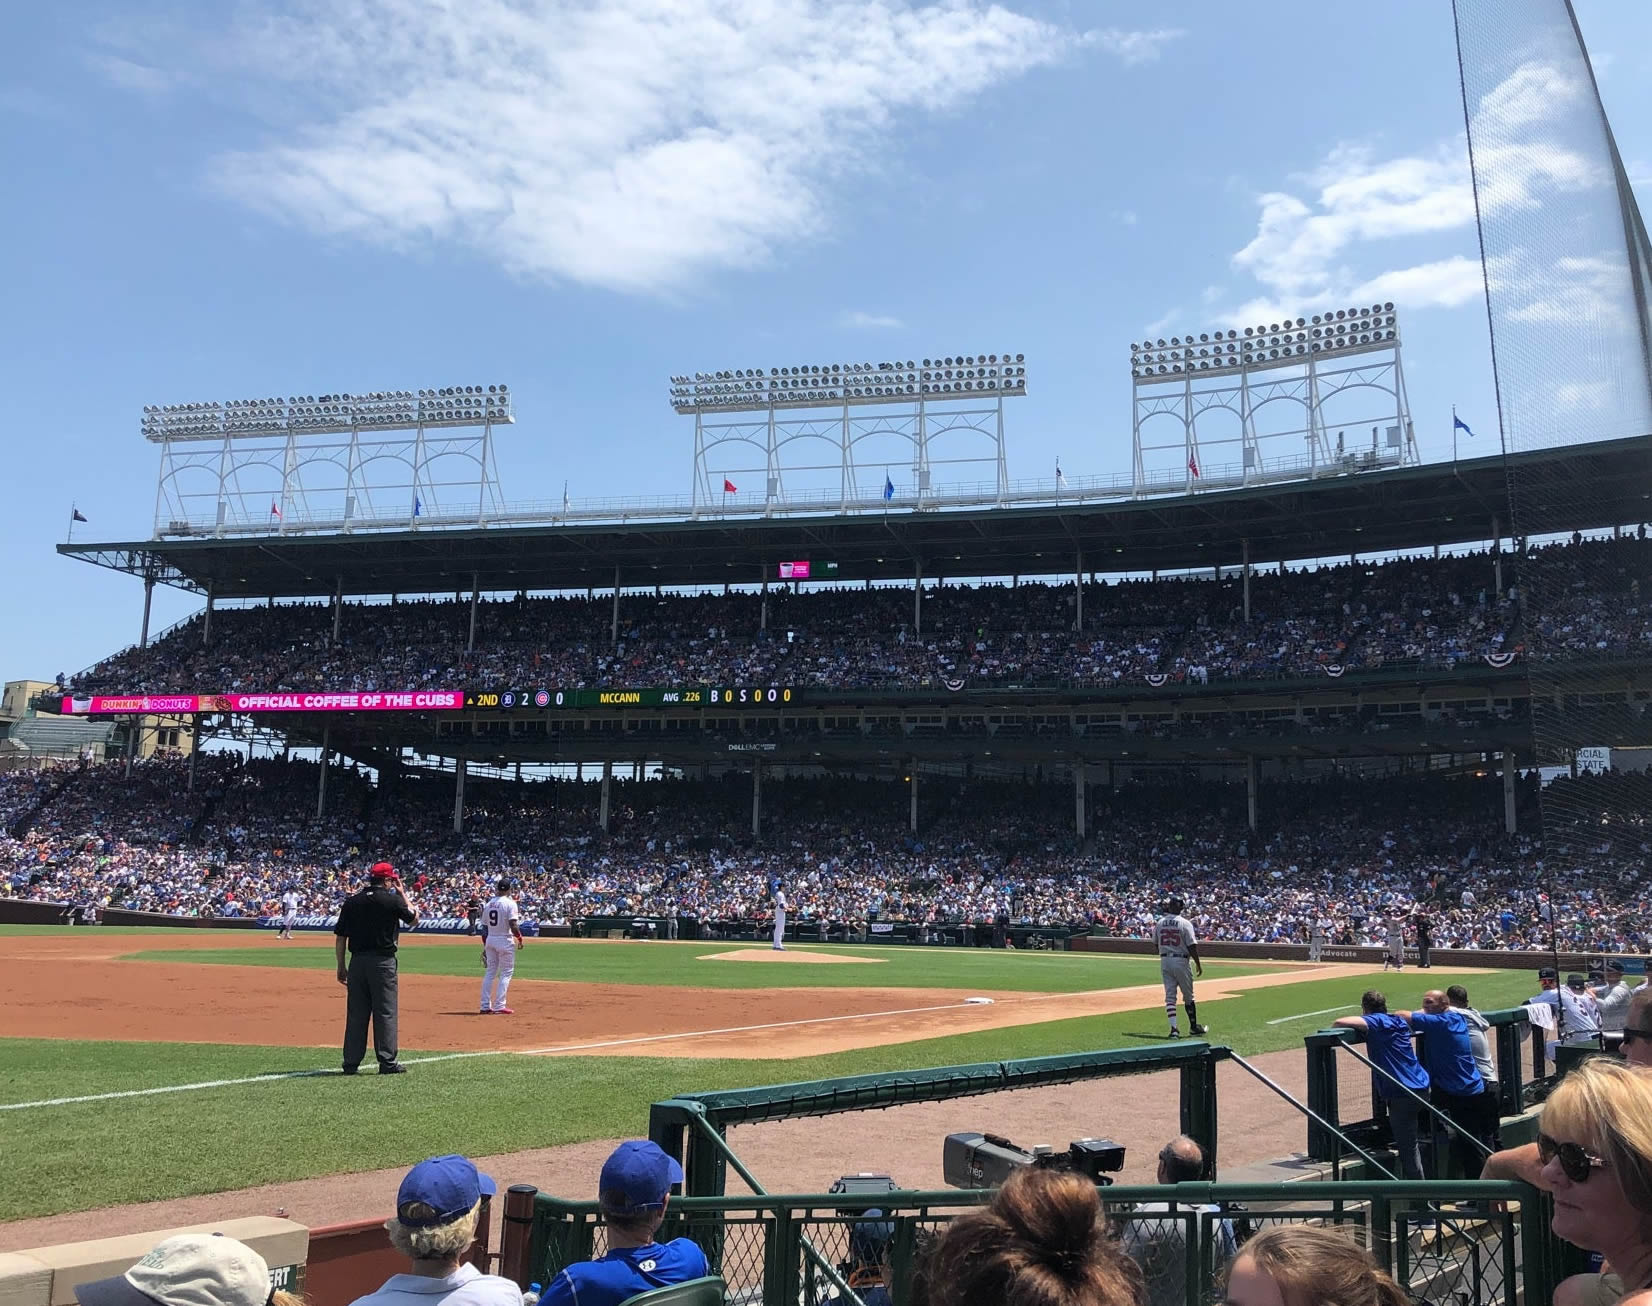 section 8, row 5 seat view  for baseball - wrigley field